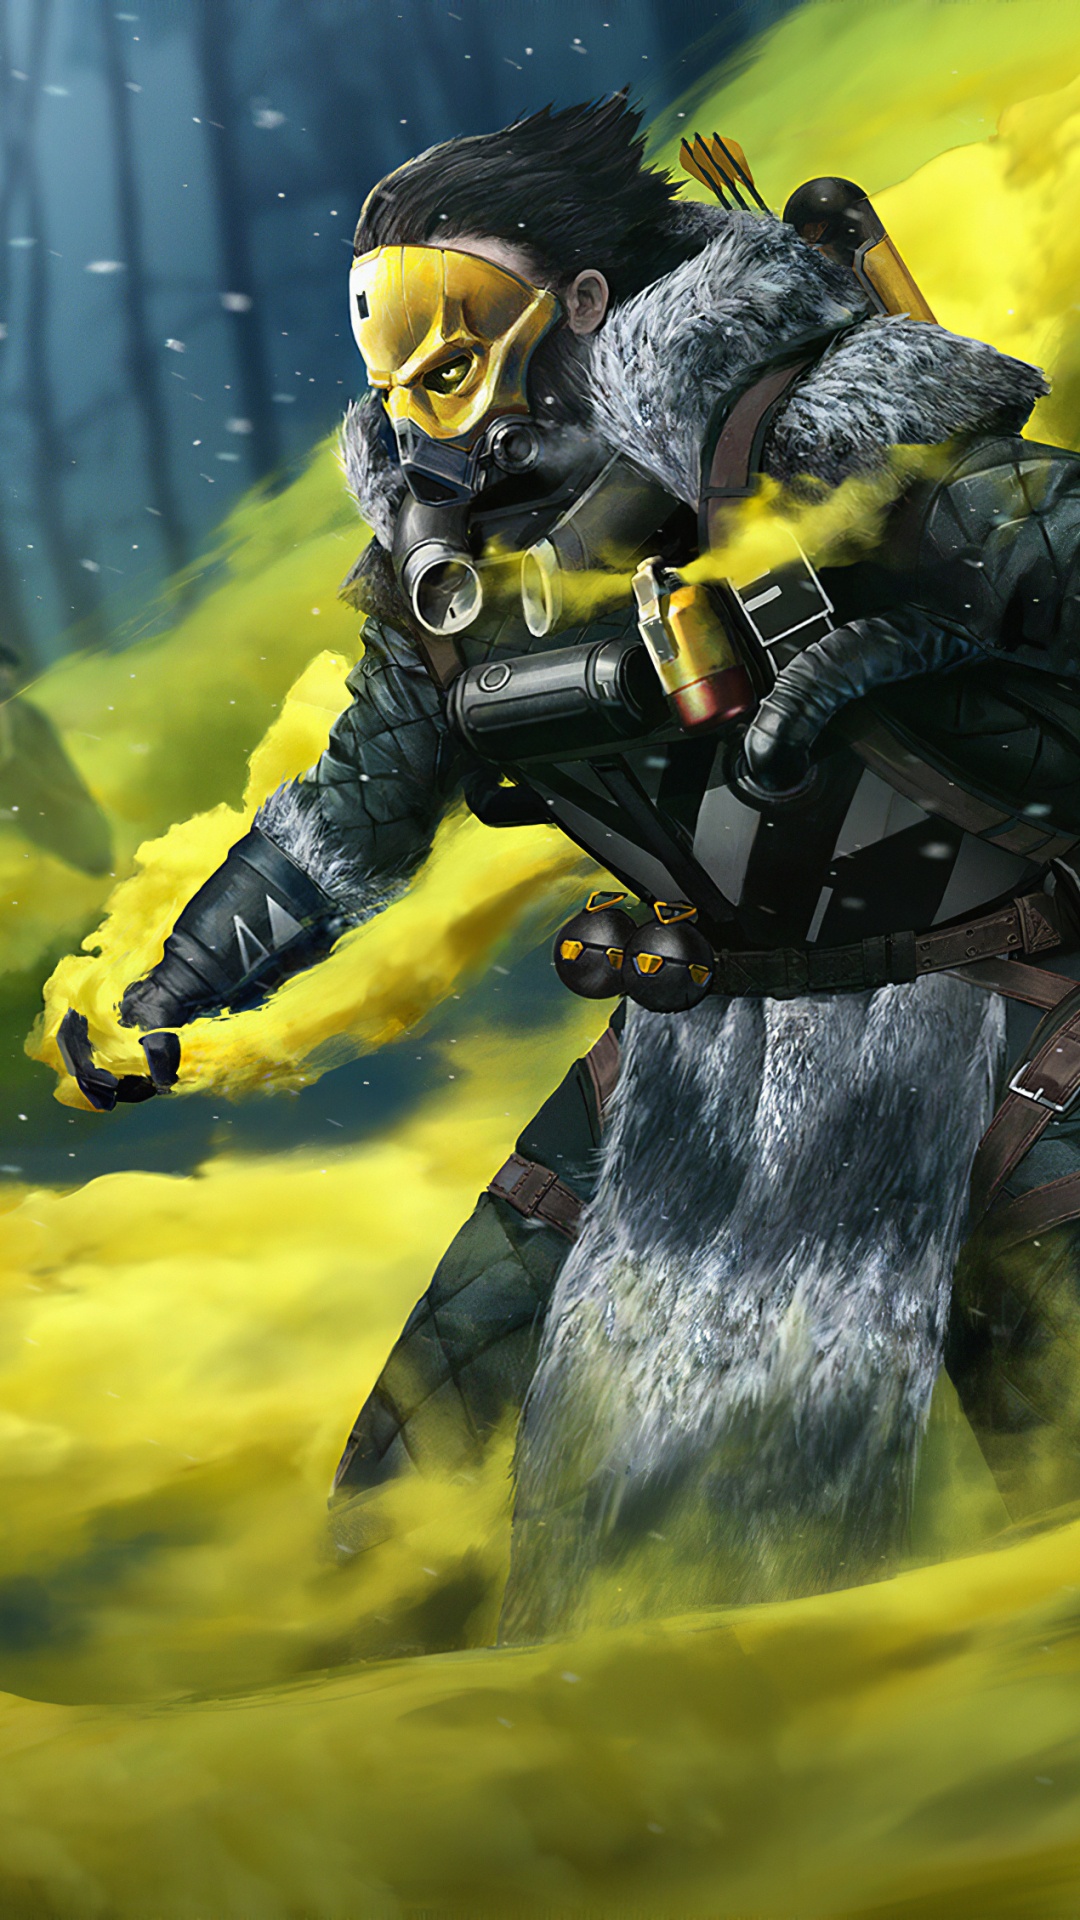 Apex Legends, Respawn Entertainment, Yellow, Games, Action Figure. Wallpaper in 1080x1920 Resolution